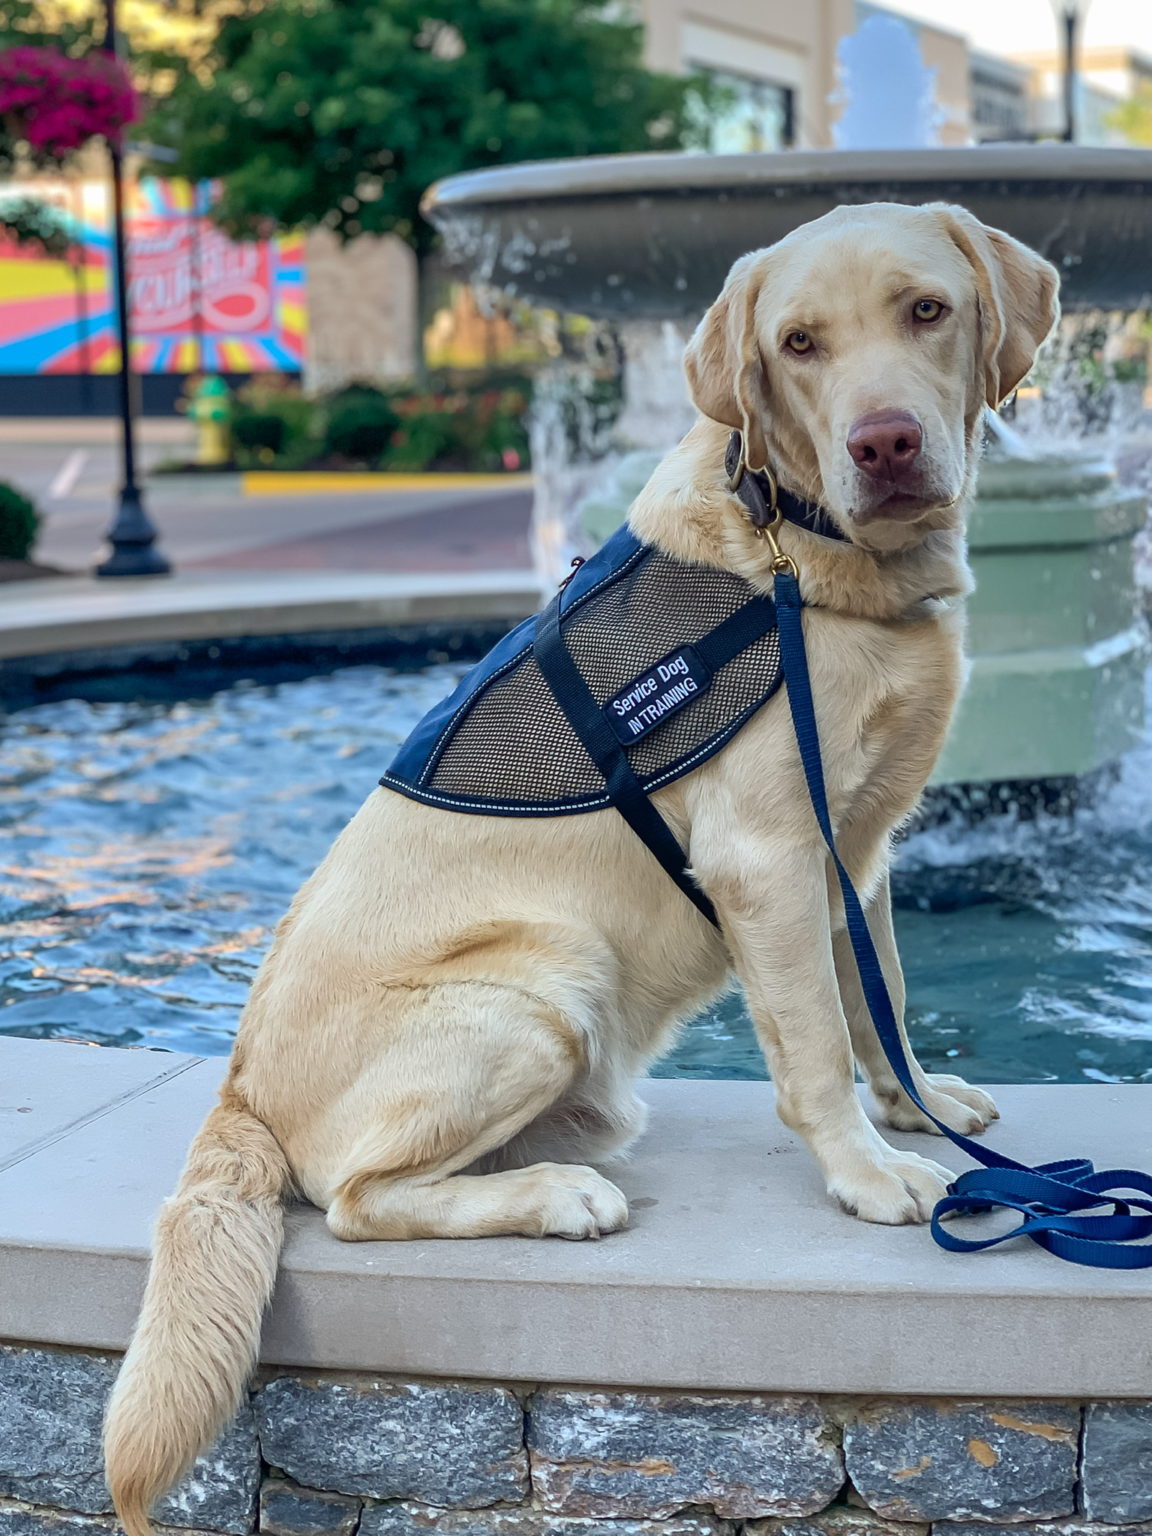 How Diabetes Service Dogs Can Help With Your Diabetes